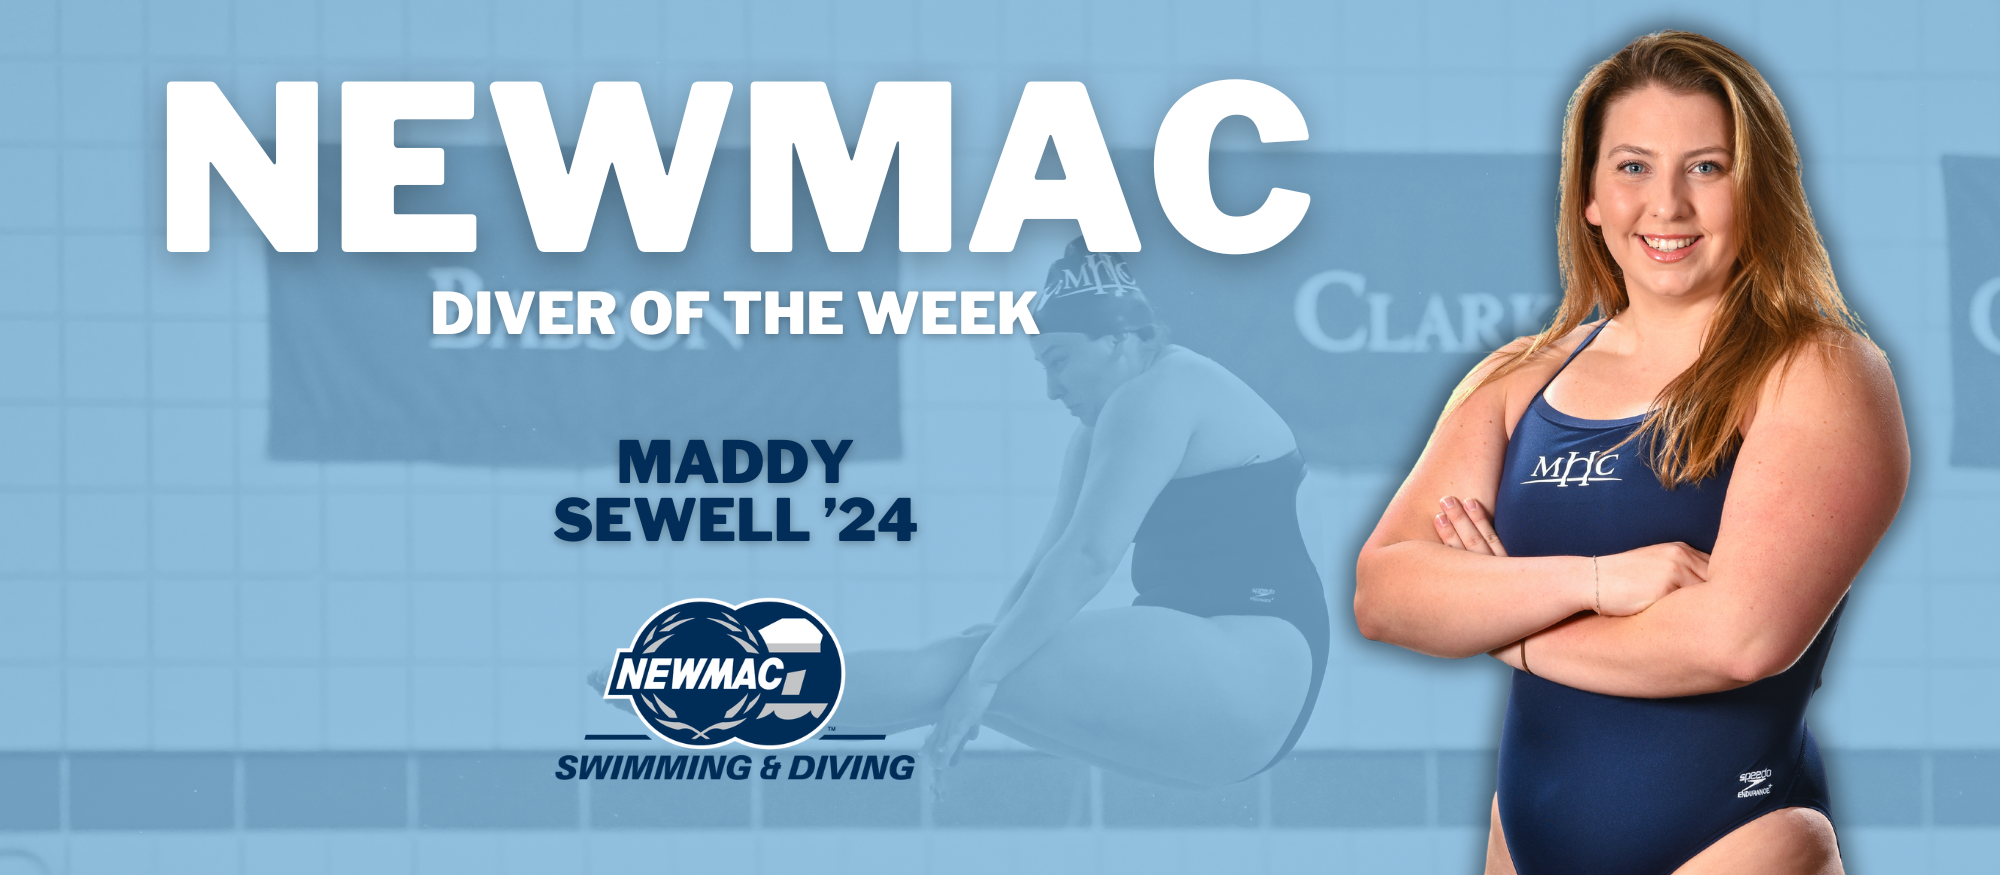 Sewell wins her second NEWMAC Diver of the Week honor this season